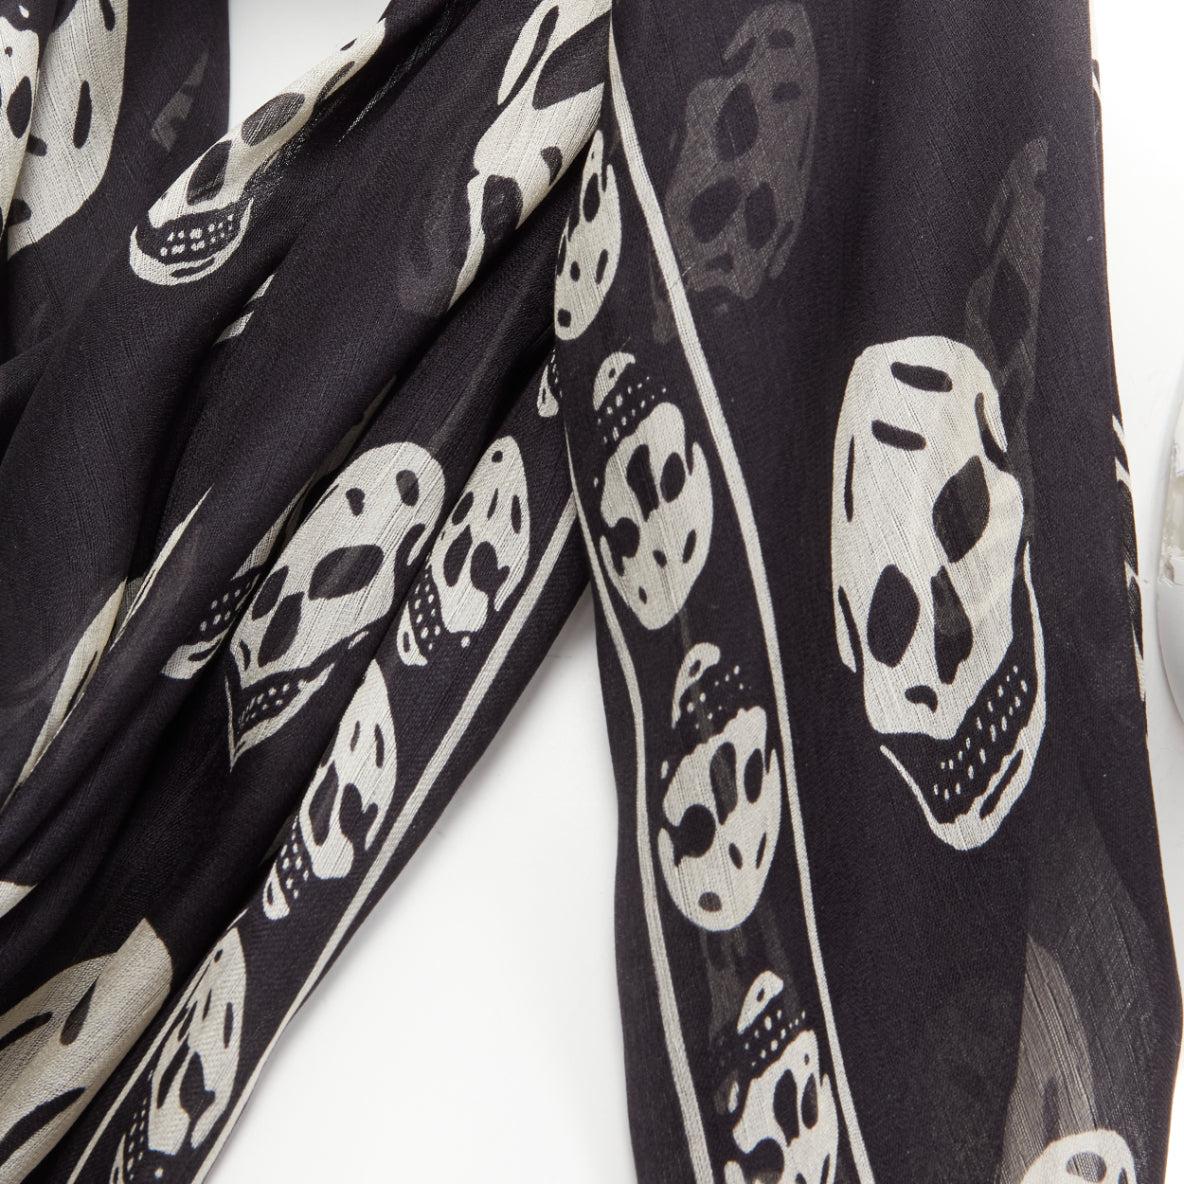 ALEXANDER MCQUEEN black white skull logo print 100% silk scarf
Reference: SNKO/A00348
Brand: Alexander McQueen
Material: Silk
Color: White, Black
Pattern: Abstract
Extra Details: Logo at edge of scarf.
Made in: Italy

CONDITION:
Condition: